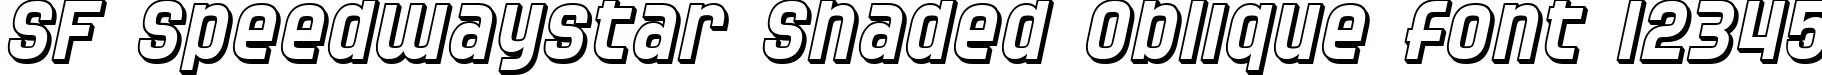 Dynamic SF Speedwaystar Shaded Oblique Font Preview https://safirsoft.com